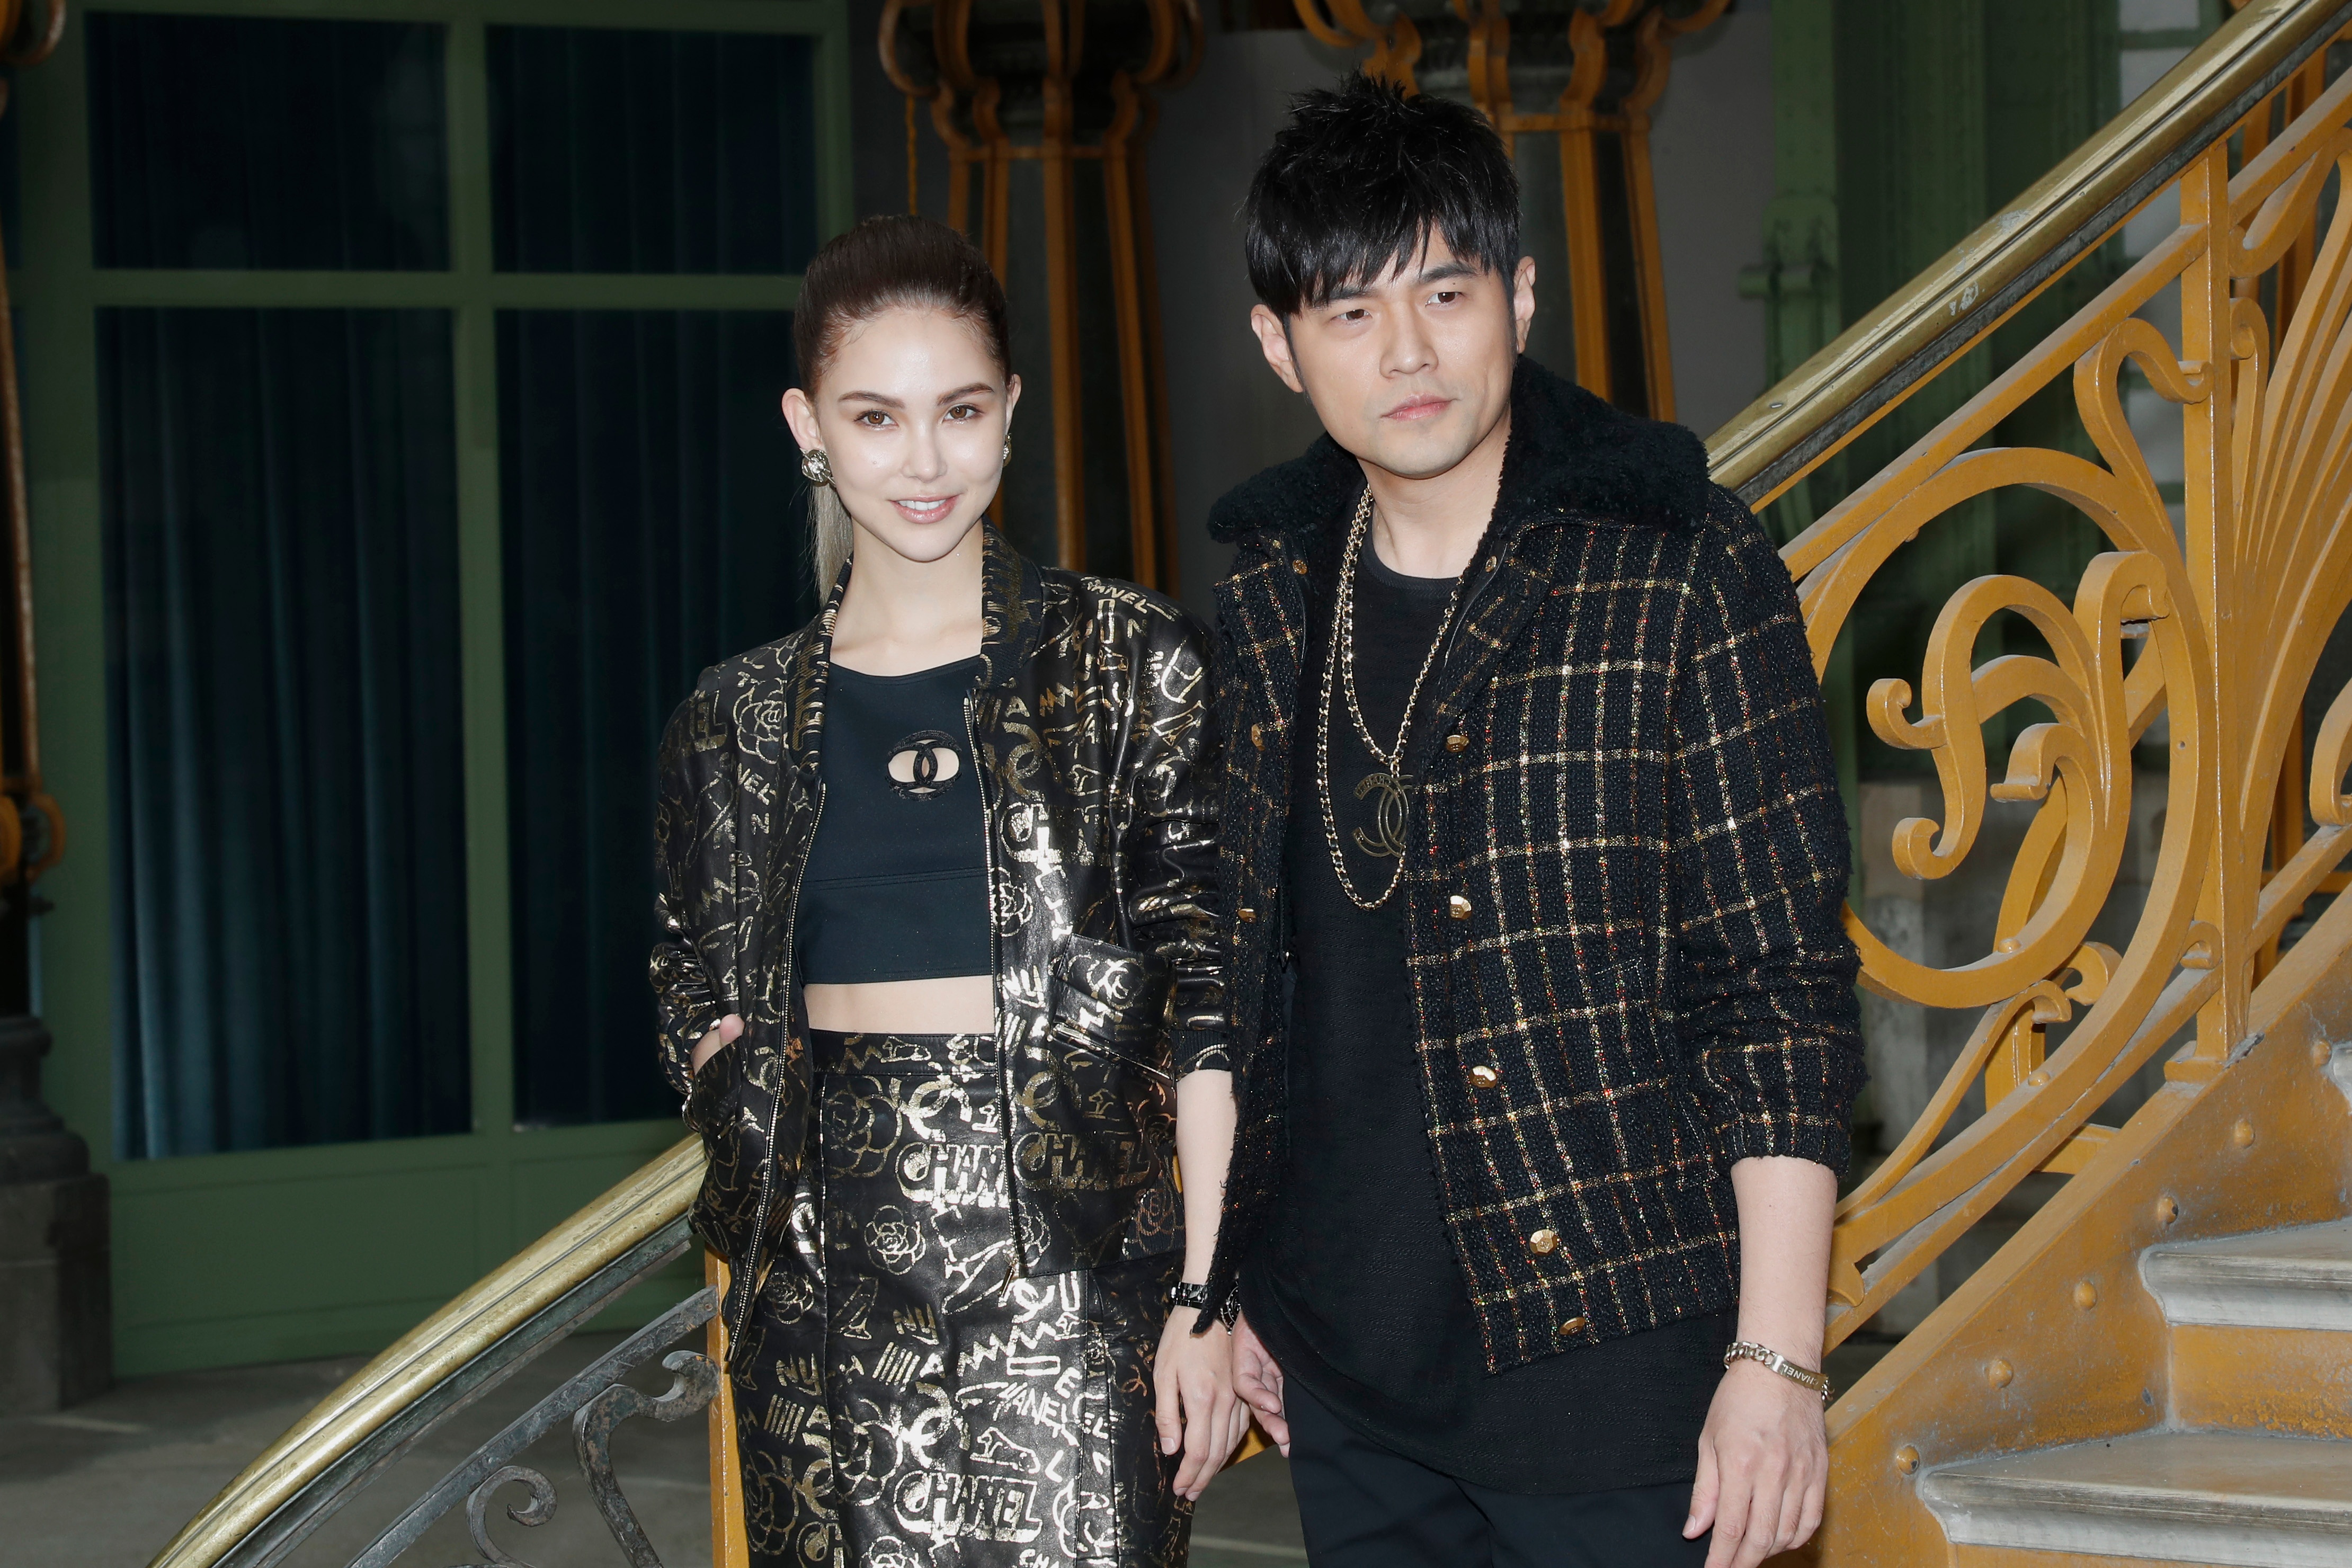 Hannah Quinlivan and Jay Chou attend the Chanel “Cruise Collection” showcase on May 3, 2019 in Paris, France. Photo: Ghetty Images